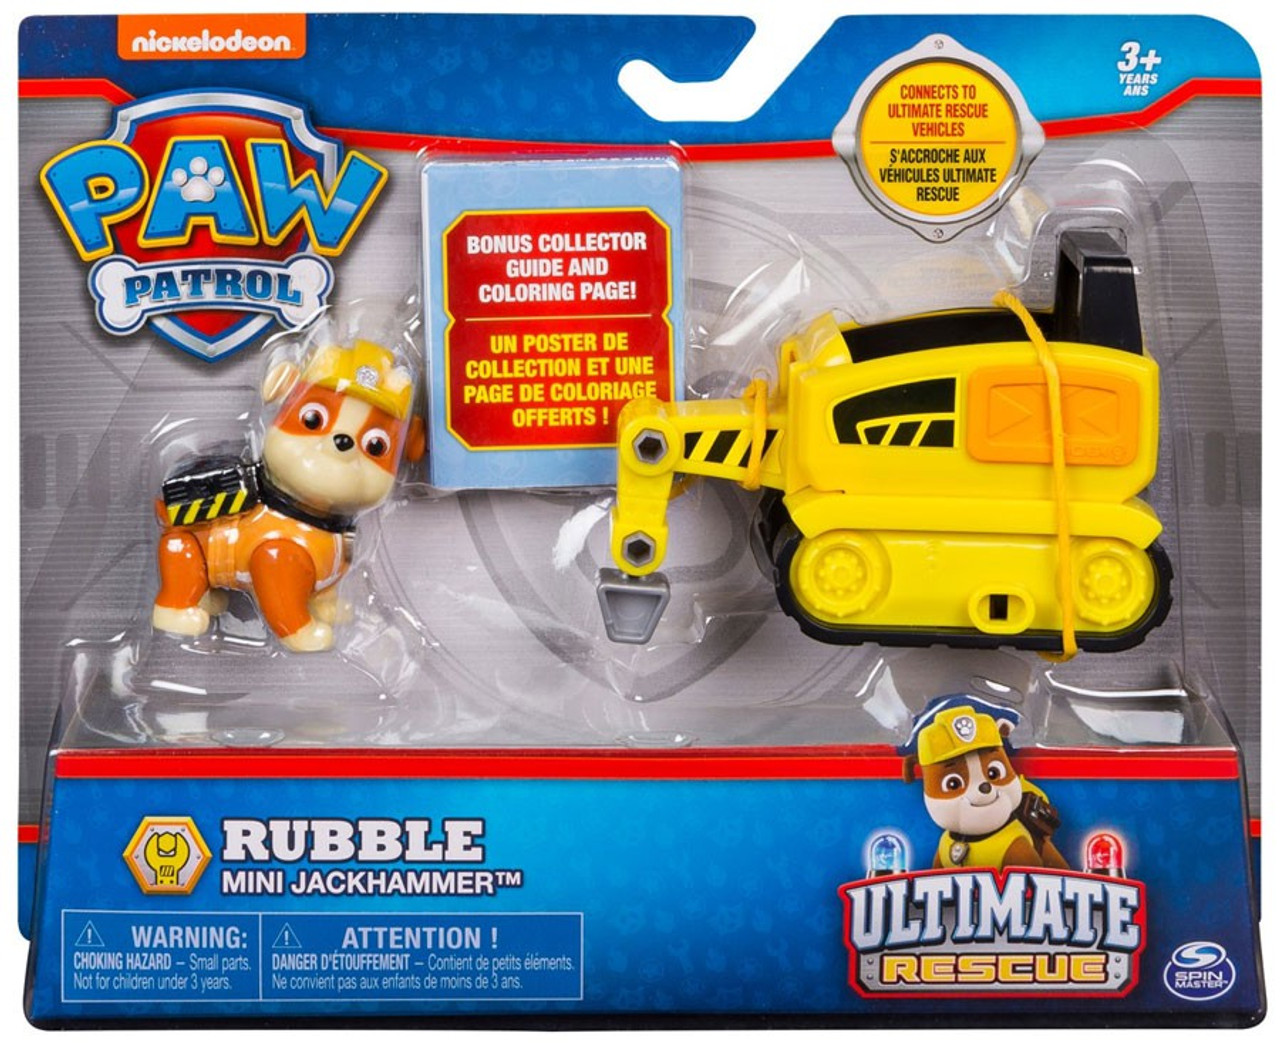 paw patrol ultimate rescue vehicle rocky